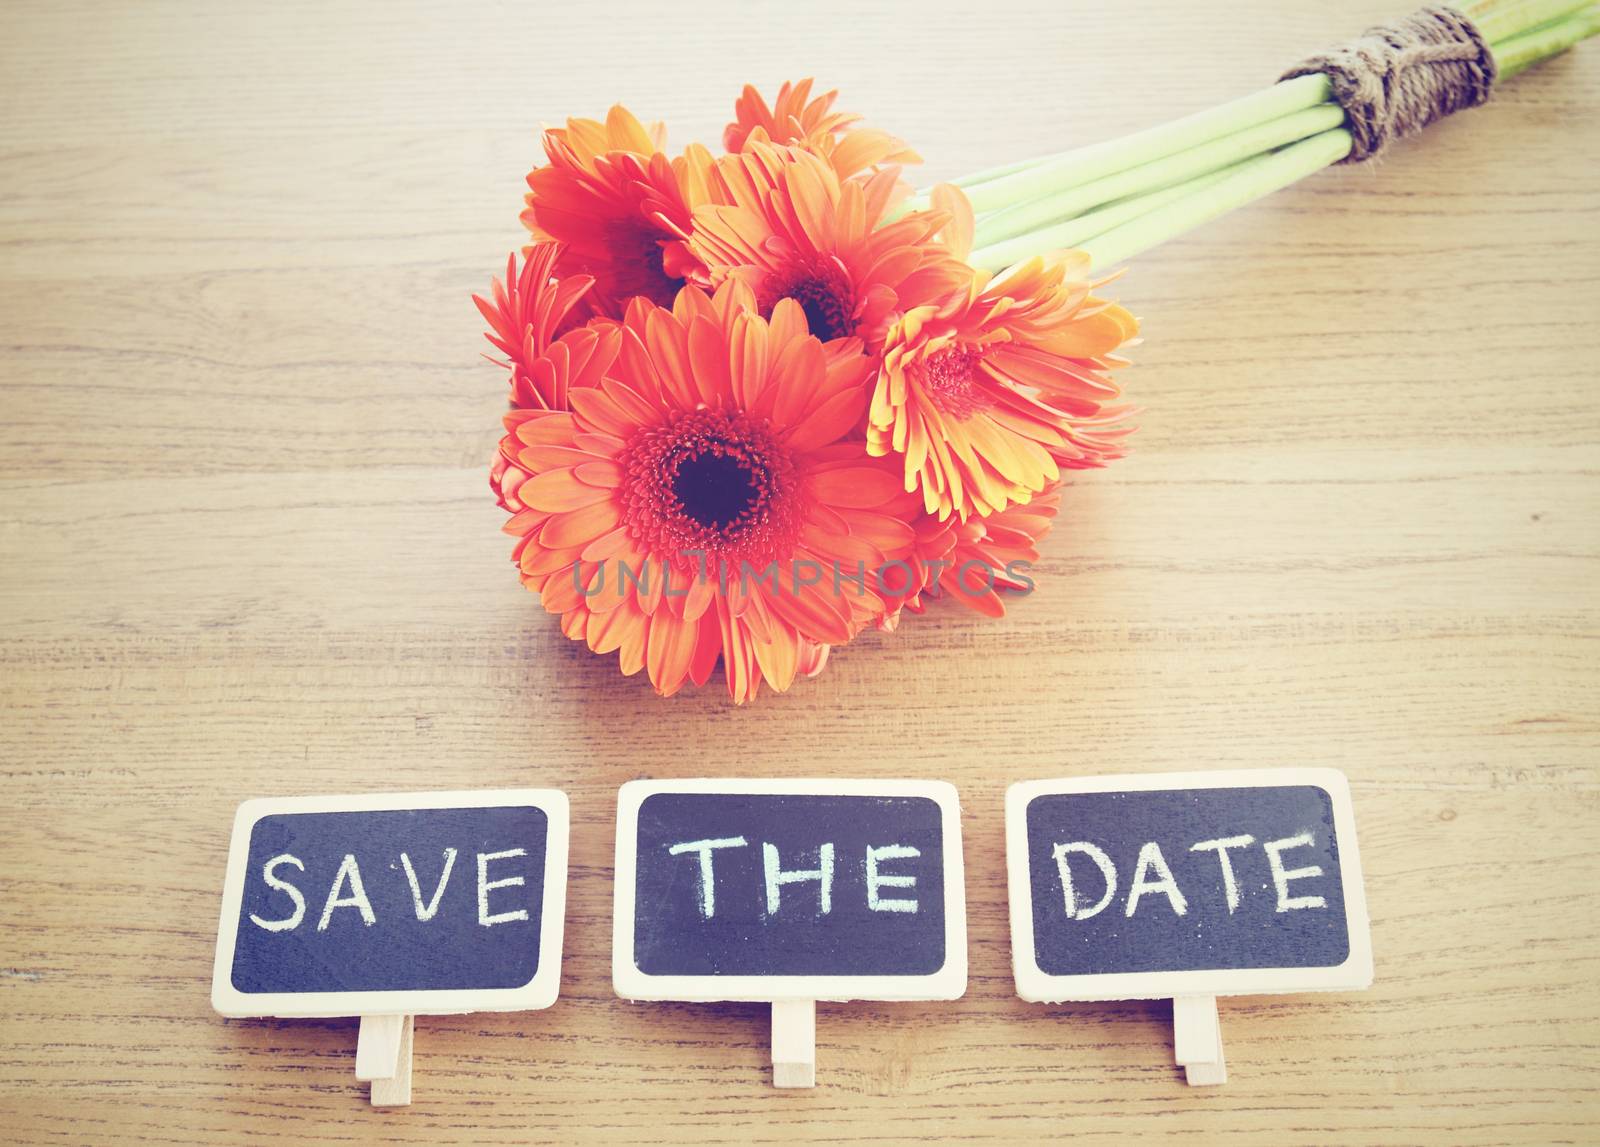 Save the date written on blackboard with flower, retro filter ef by nuchylee